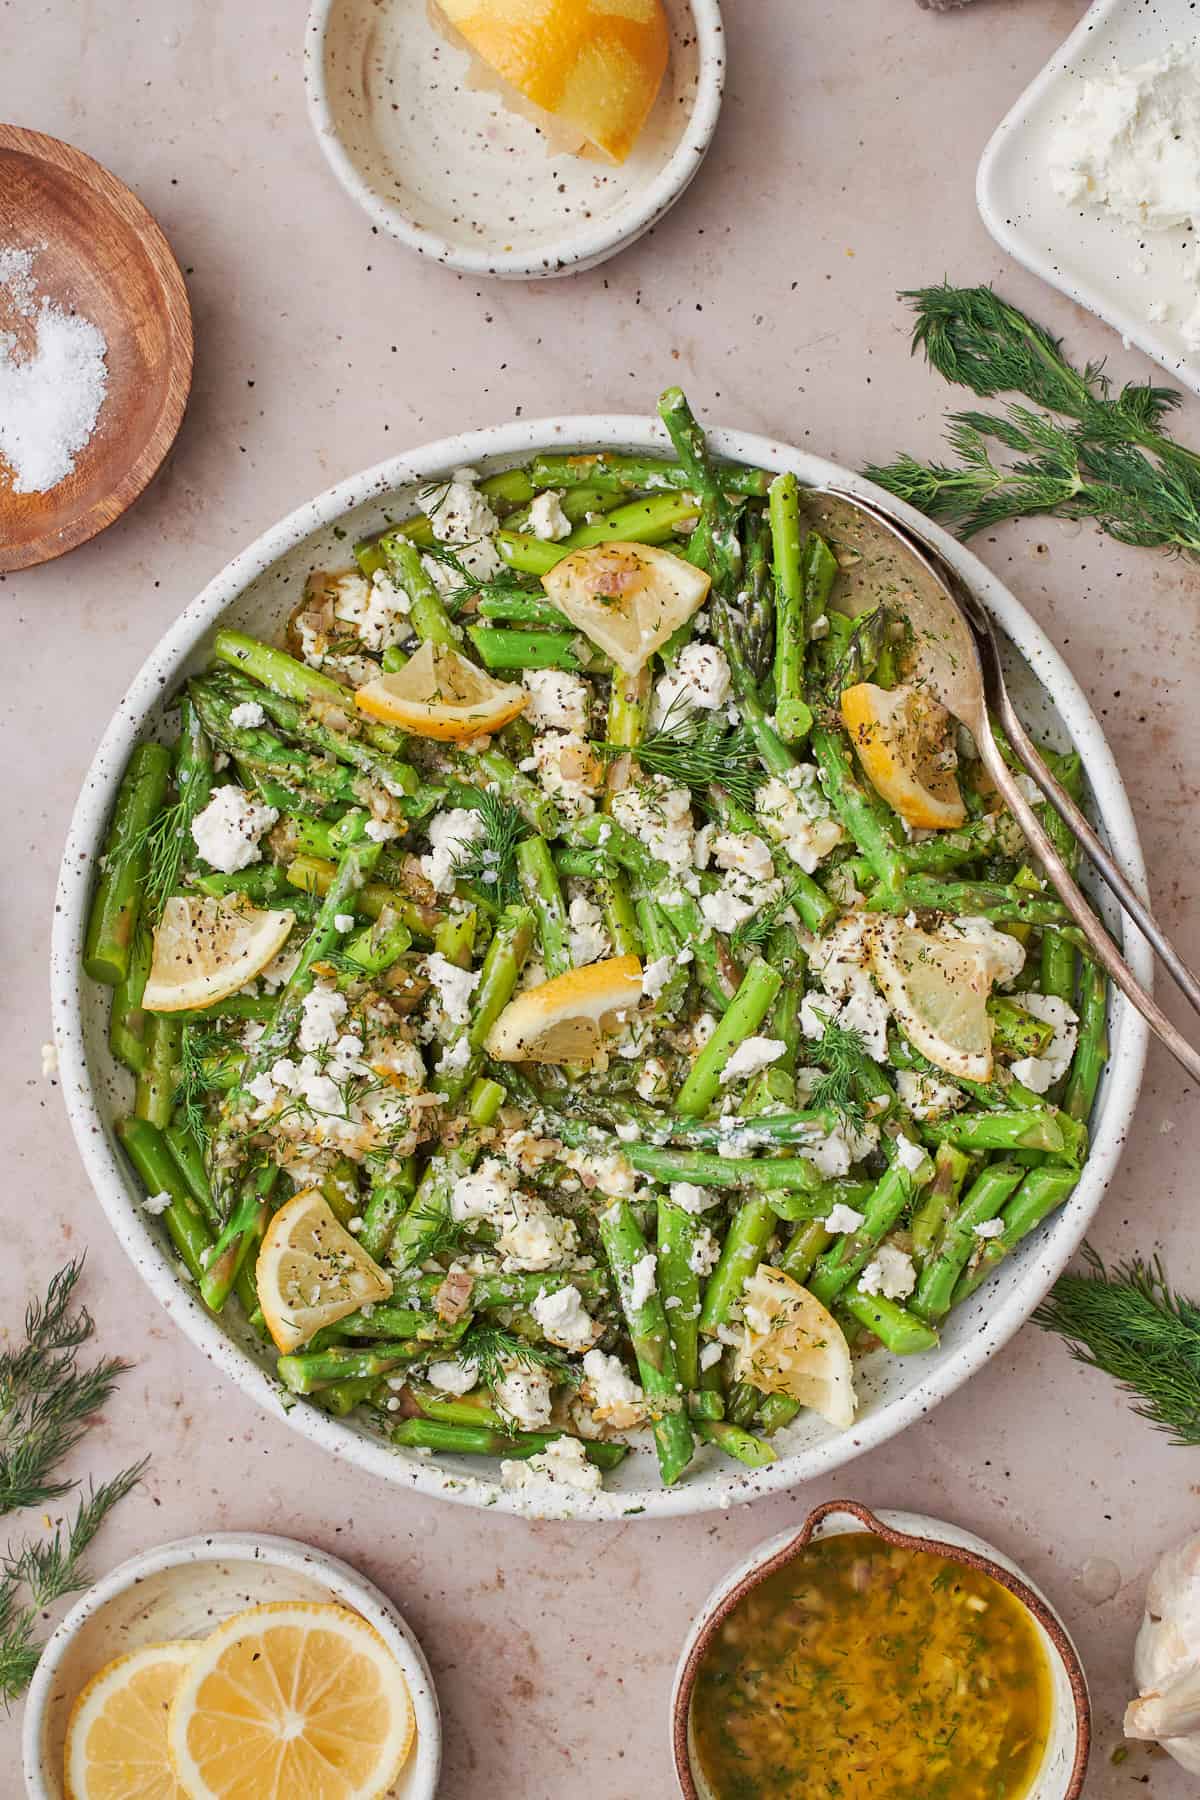 Cold asparagus salad with goat cheese, lemon, black pepper, and dill on a plate.